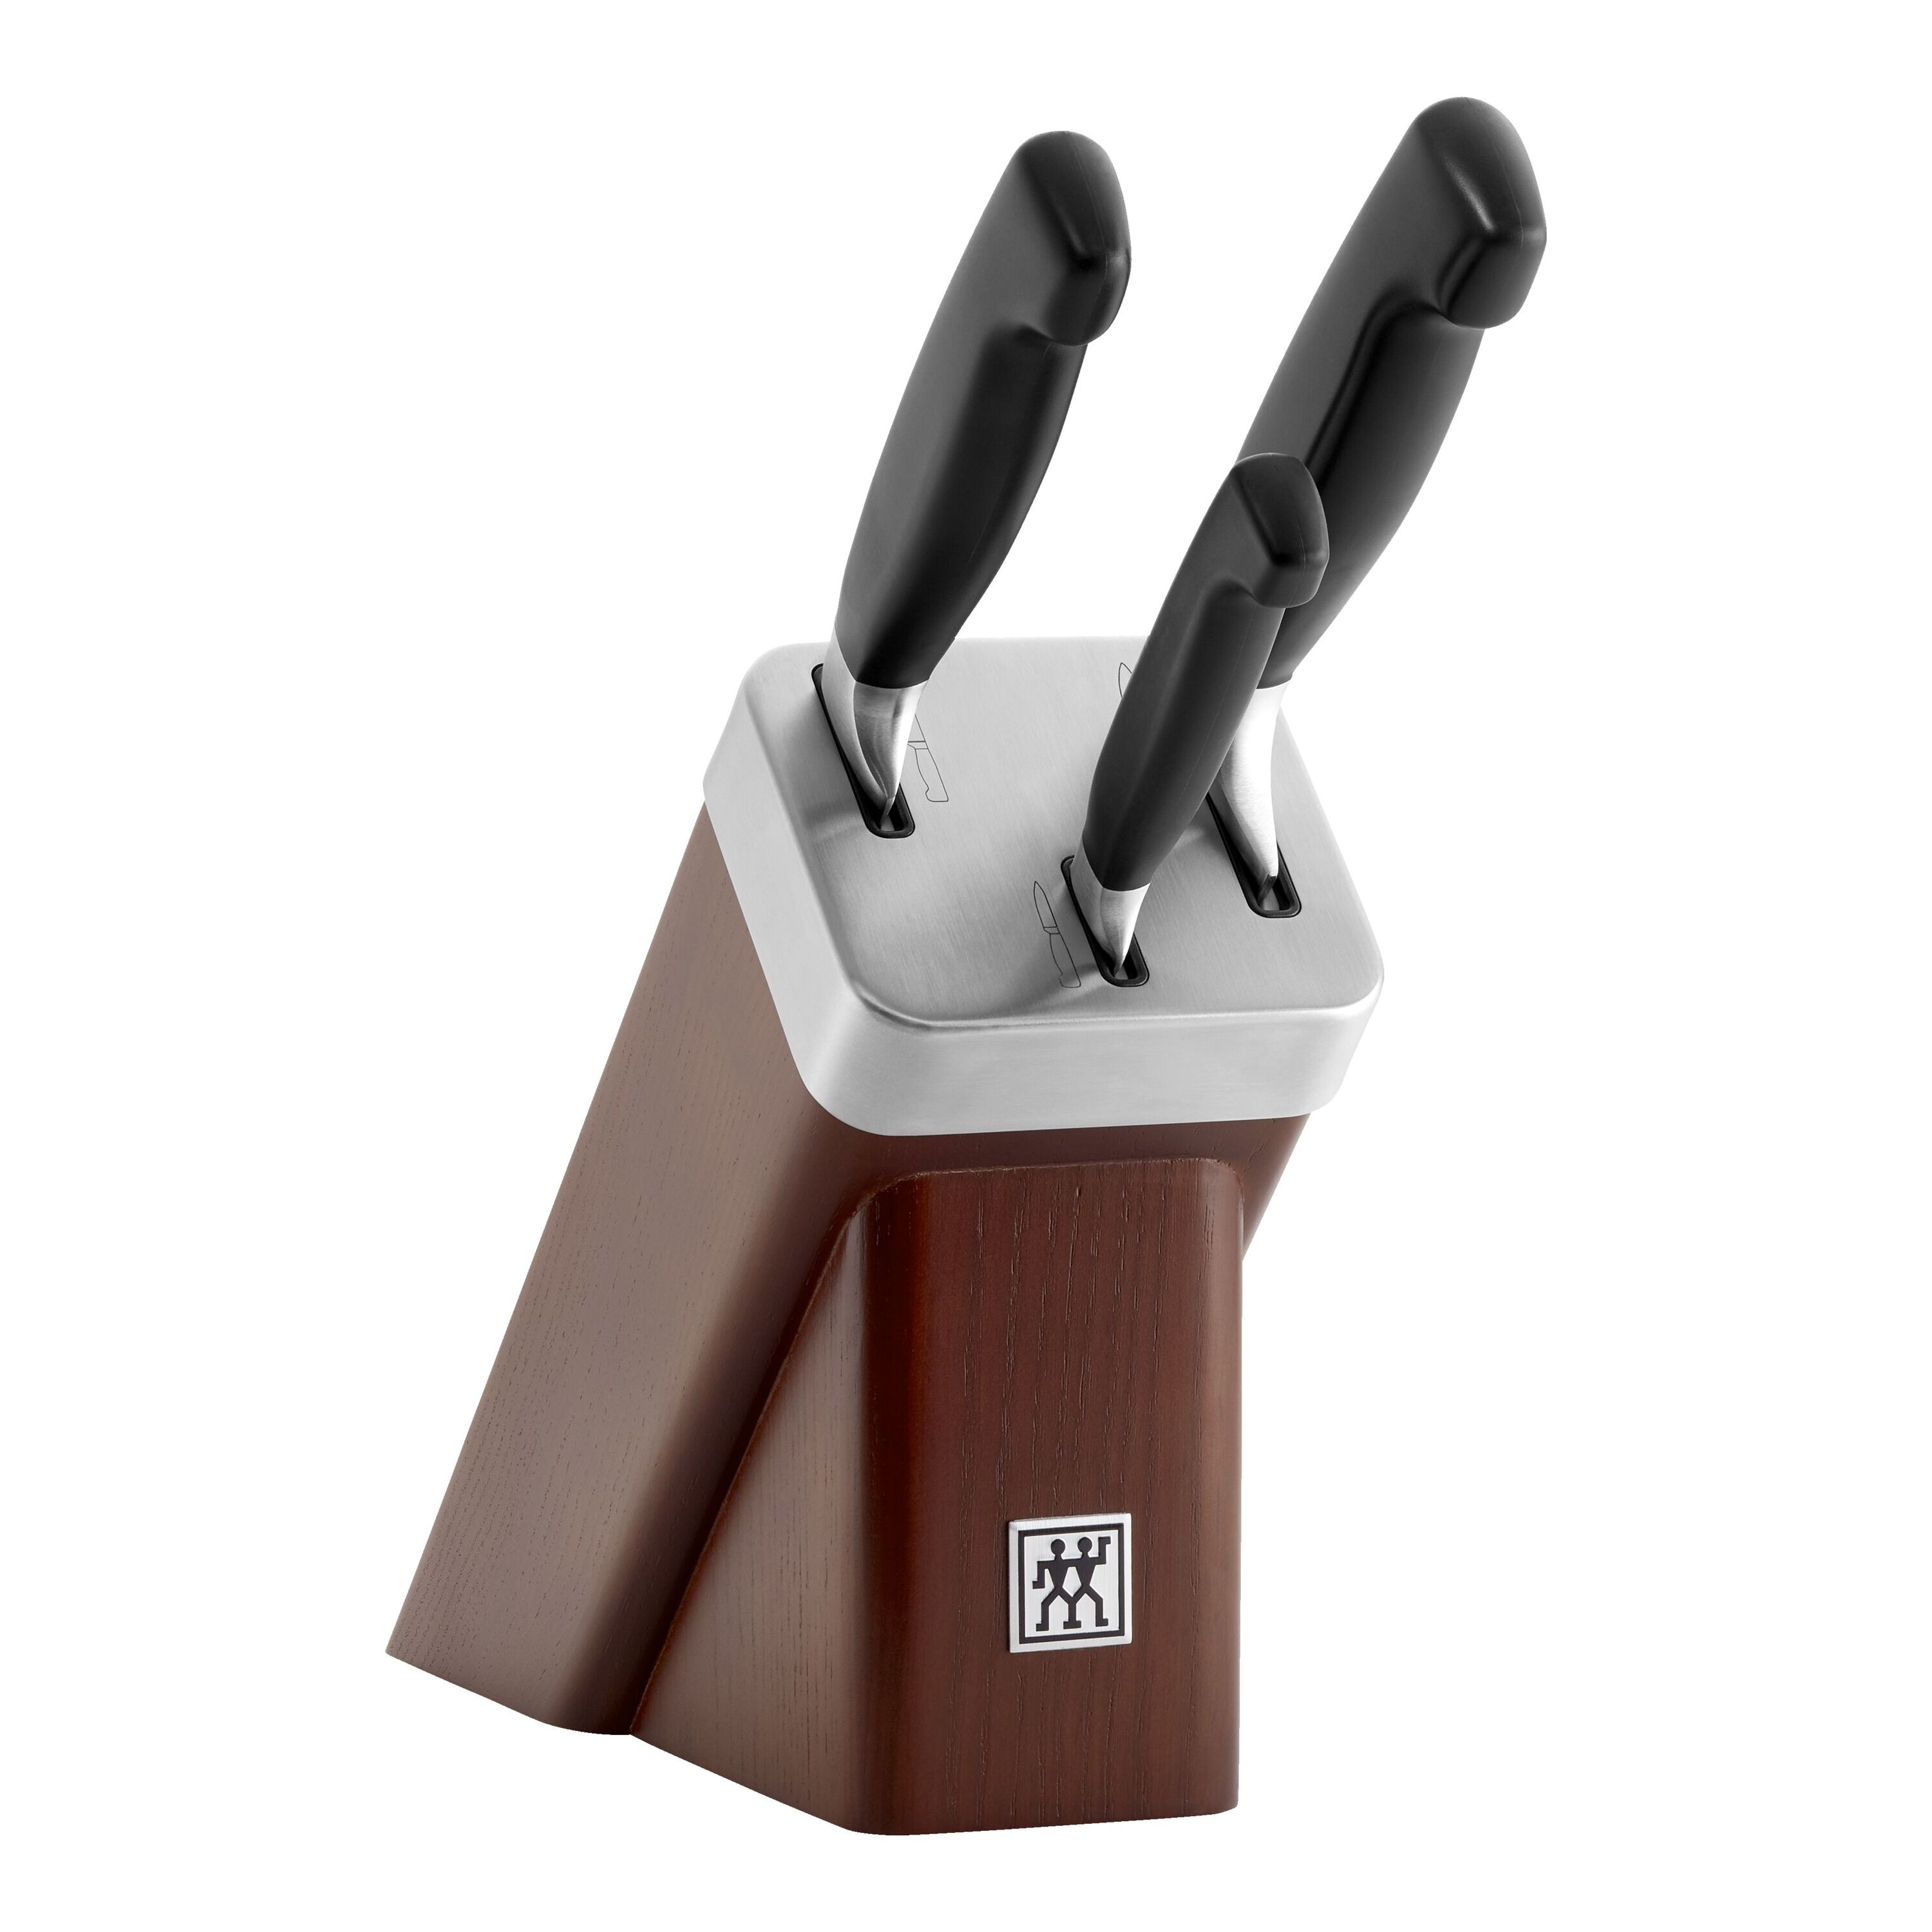 Zwilling ZWILLING TWIN Signature Self-Sharpening Knife Block Set - Brown -  8 requests